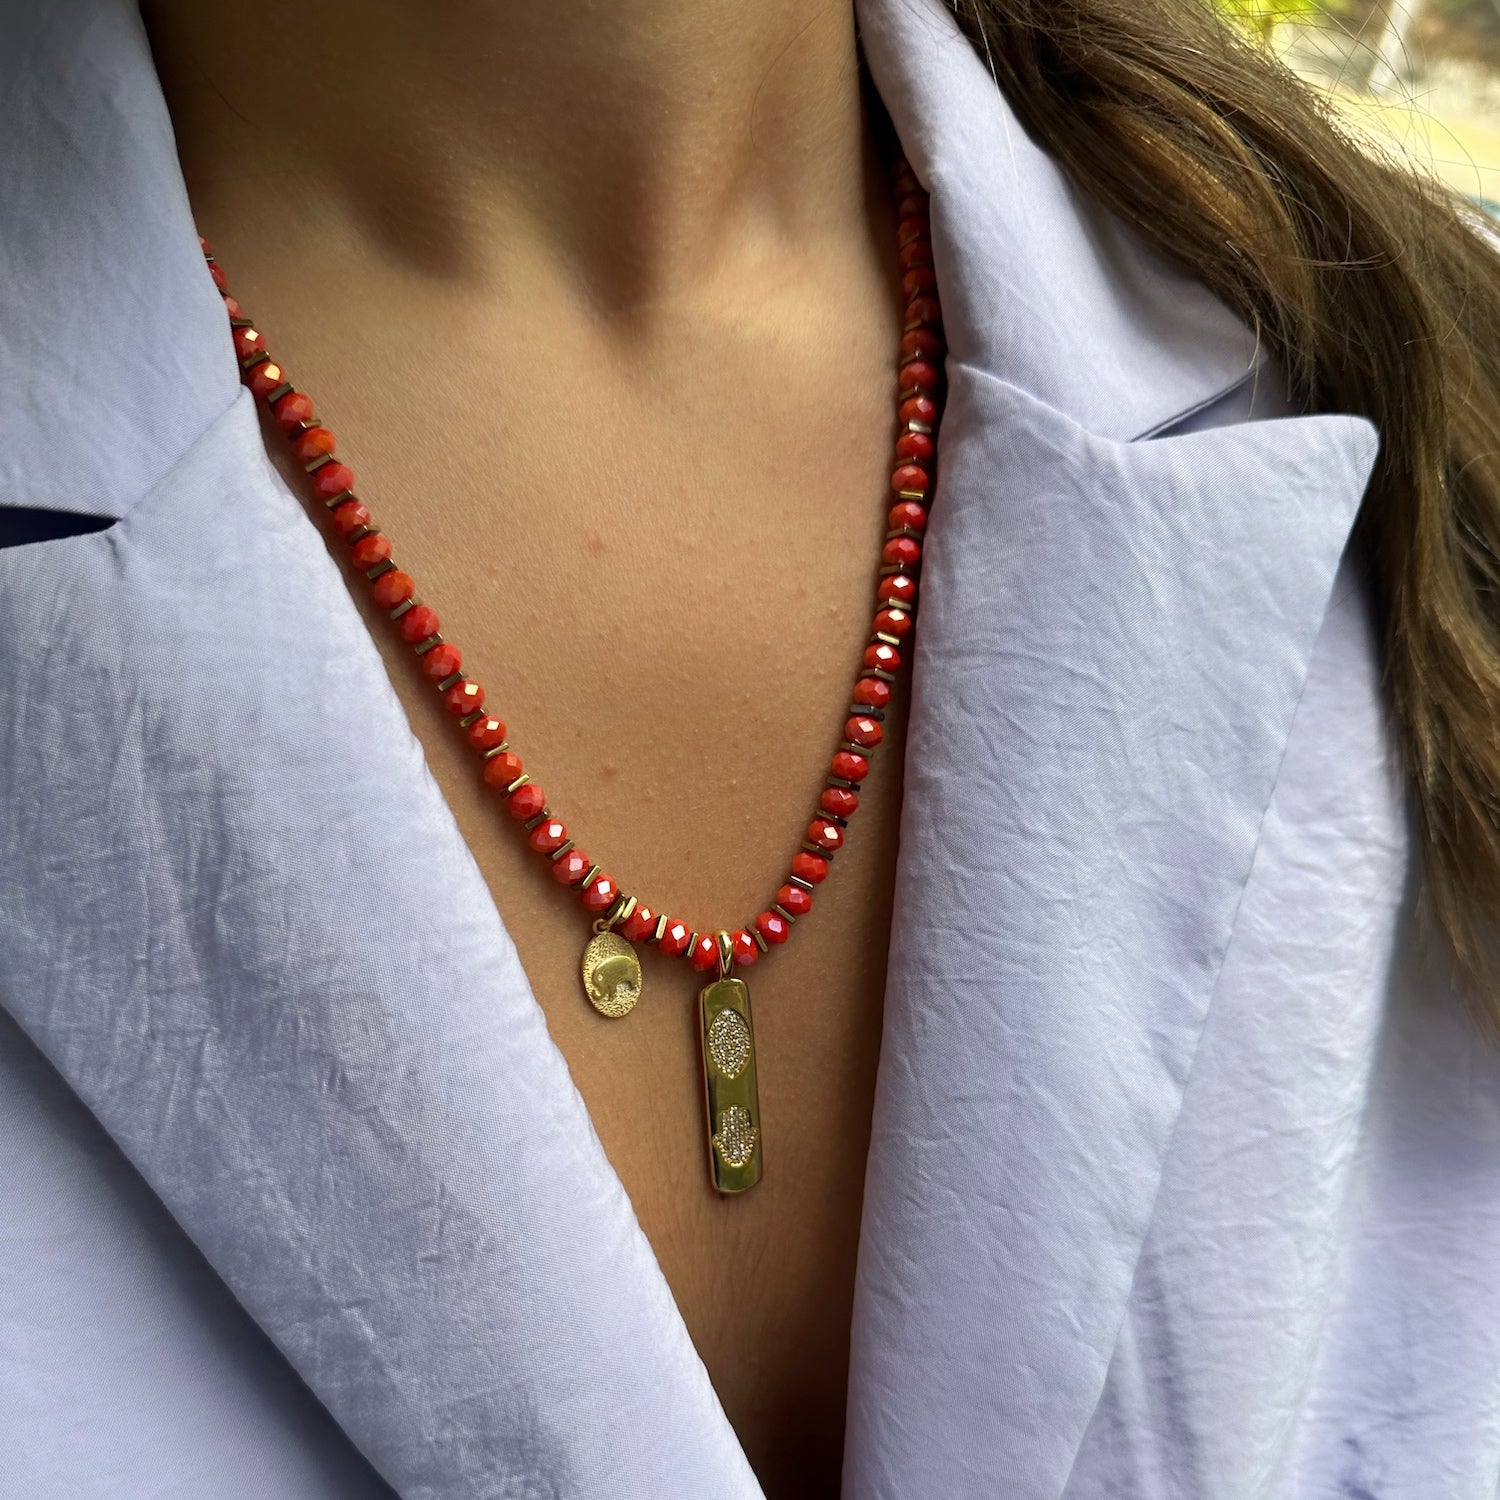 Model wearing the stunning Summer Journey Necklace with orange crystal beads and an elegant Hamsa pendant